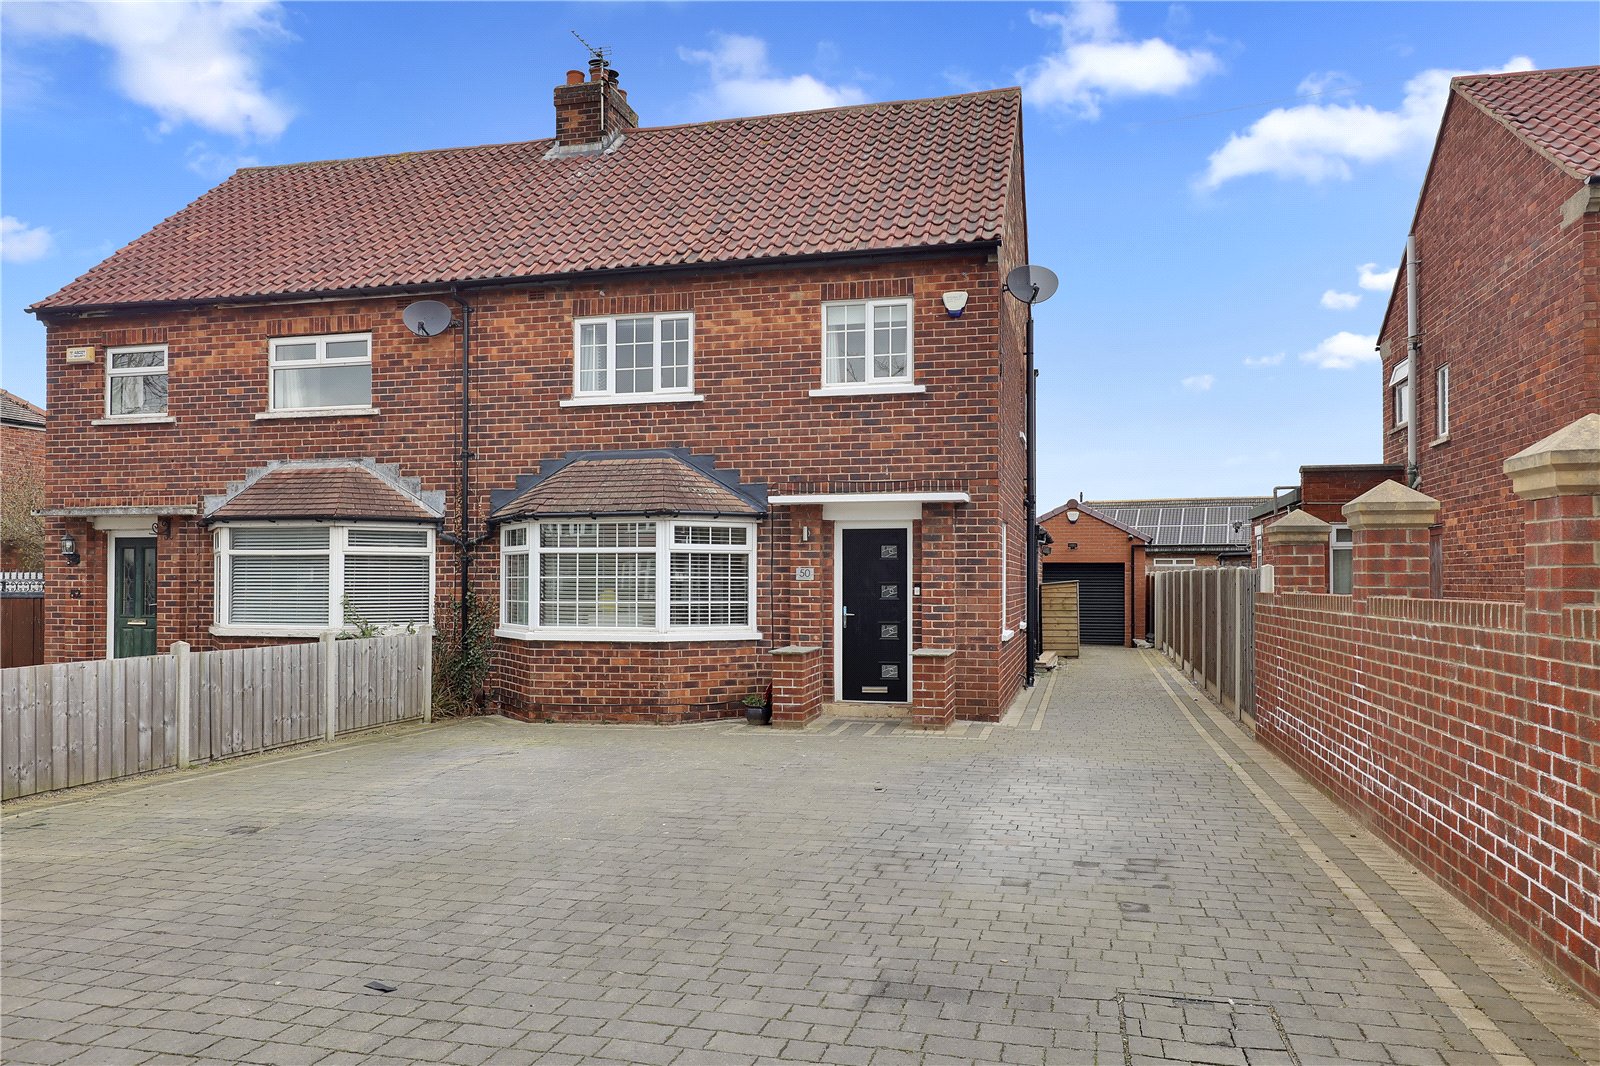 3 bed house for sale in Gunnergate Lane, Marton  - Property Image 1